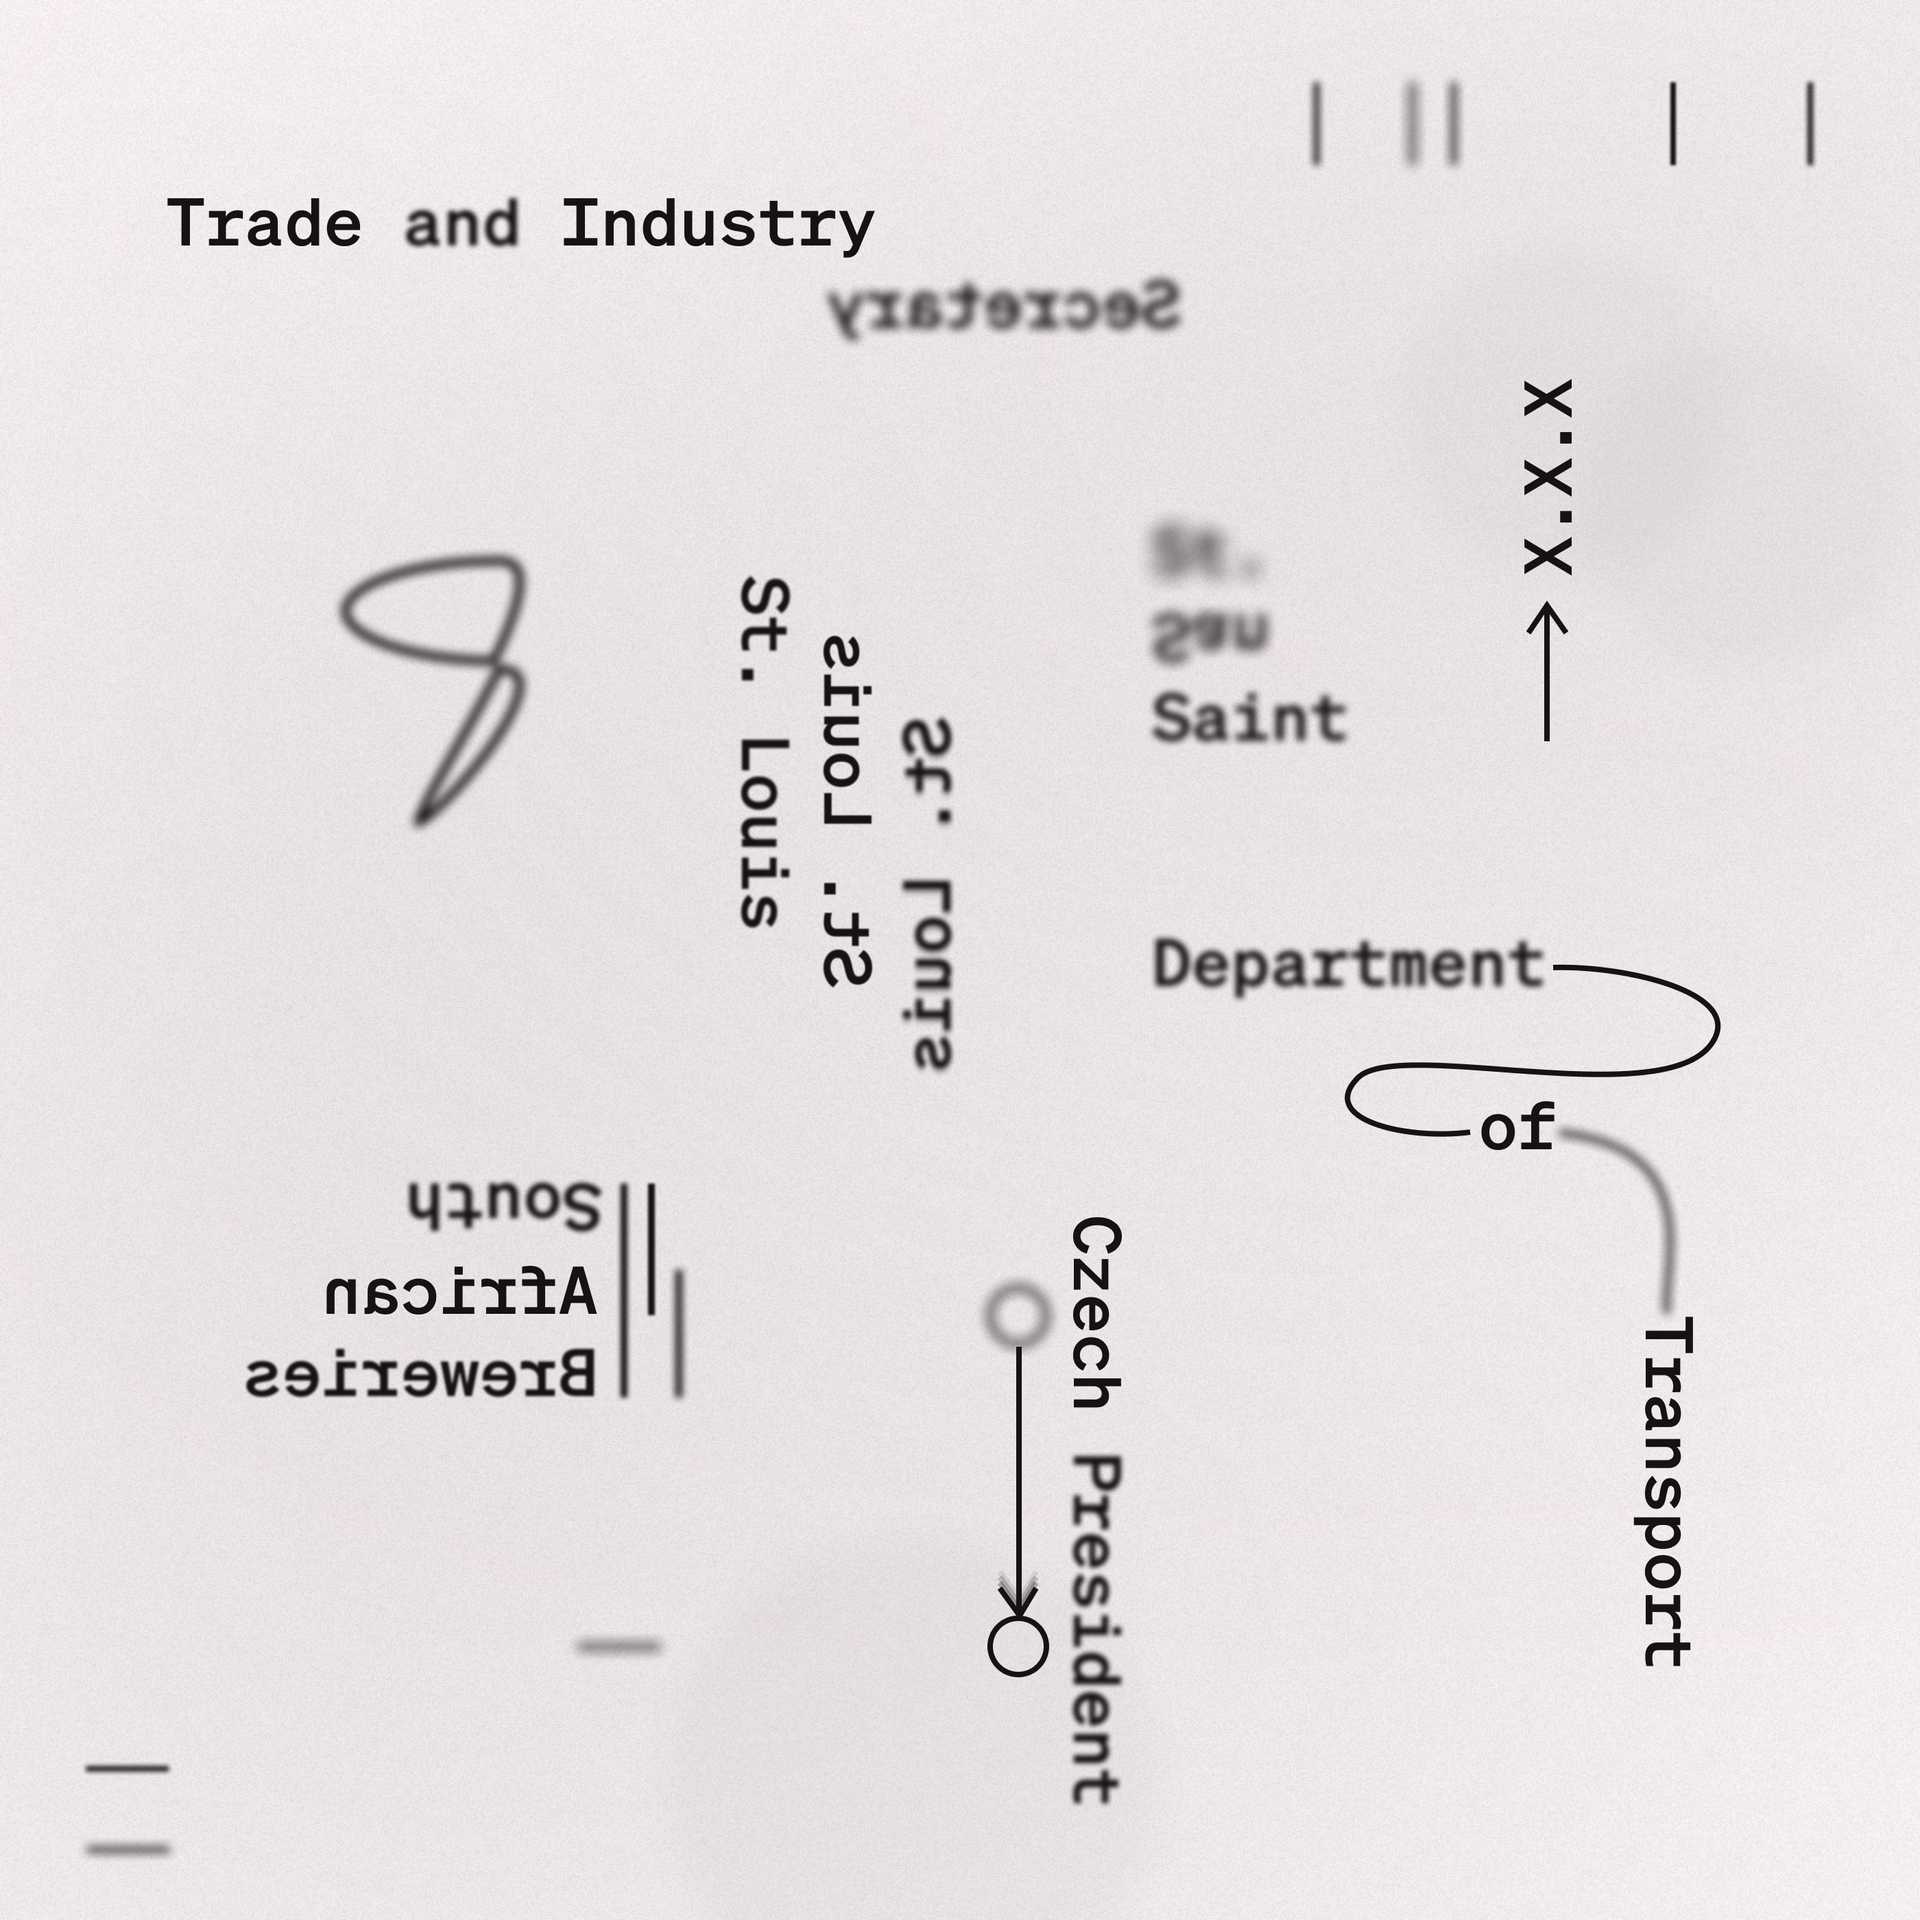 Stylized name chunks, including “St. Louis”, “South African Breweries”, “Department of Transaport” among others